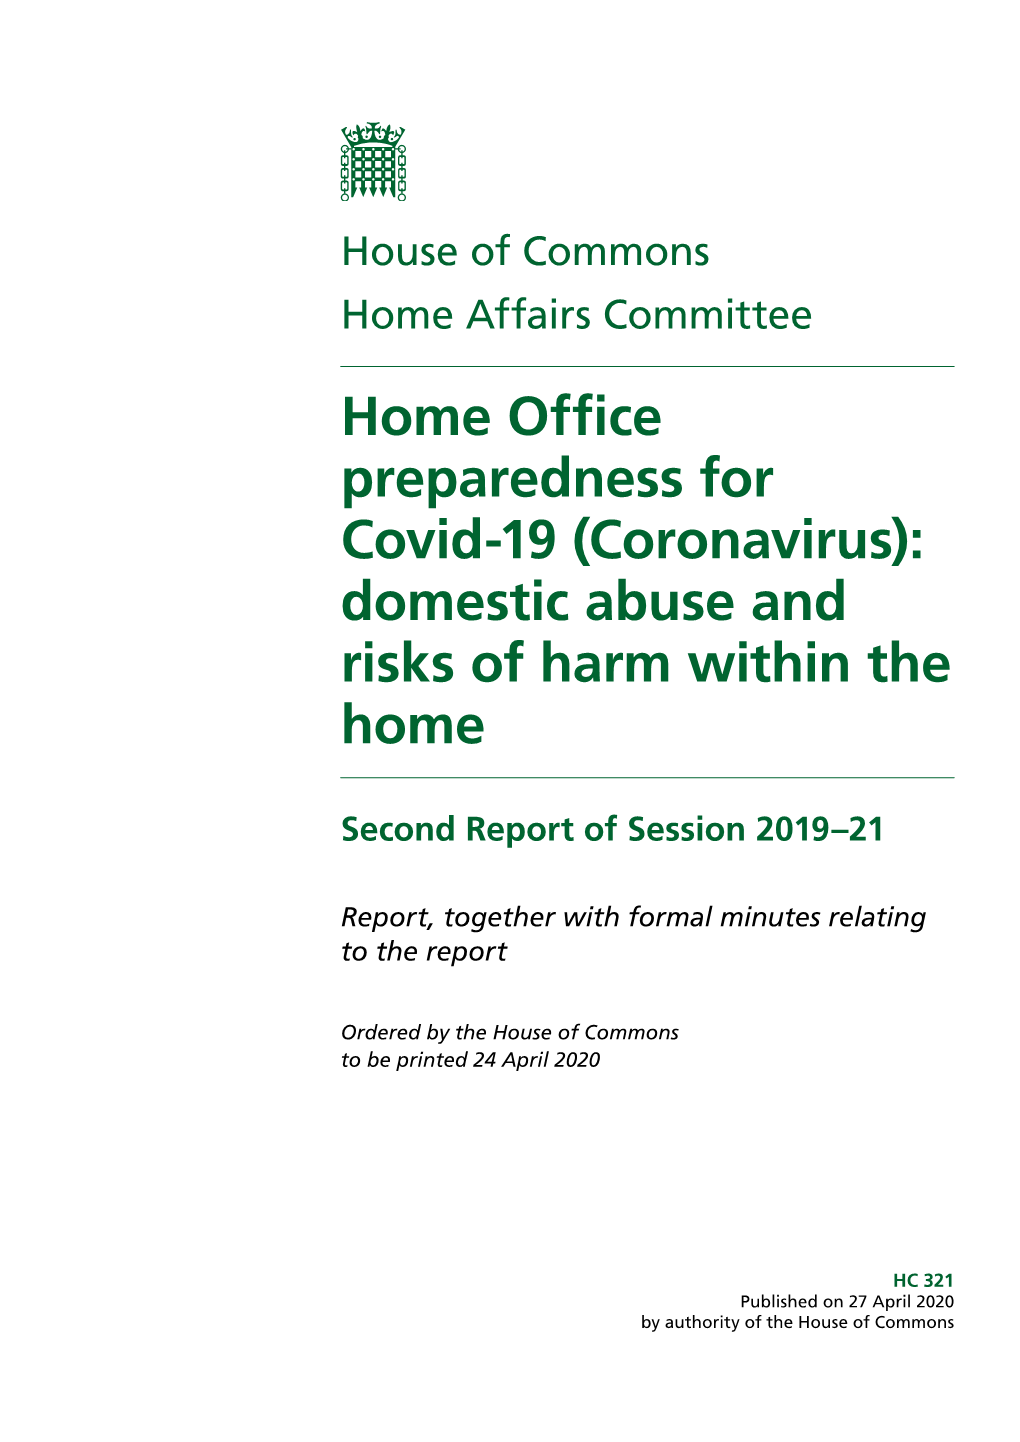 Home Office Preparedness for Covid-19 (Coronavirus): Domestic Abuse and Risks of Harm Within the Home